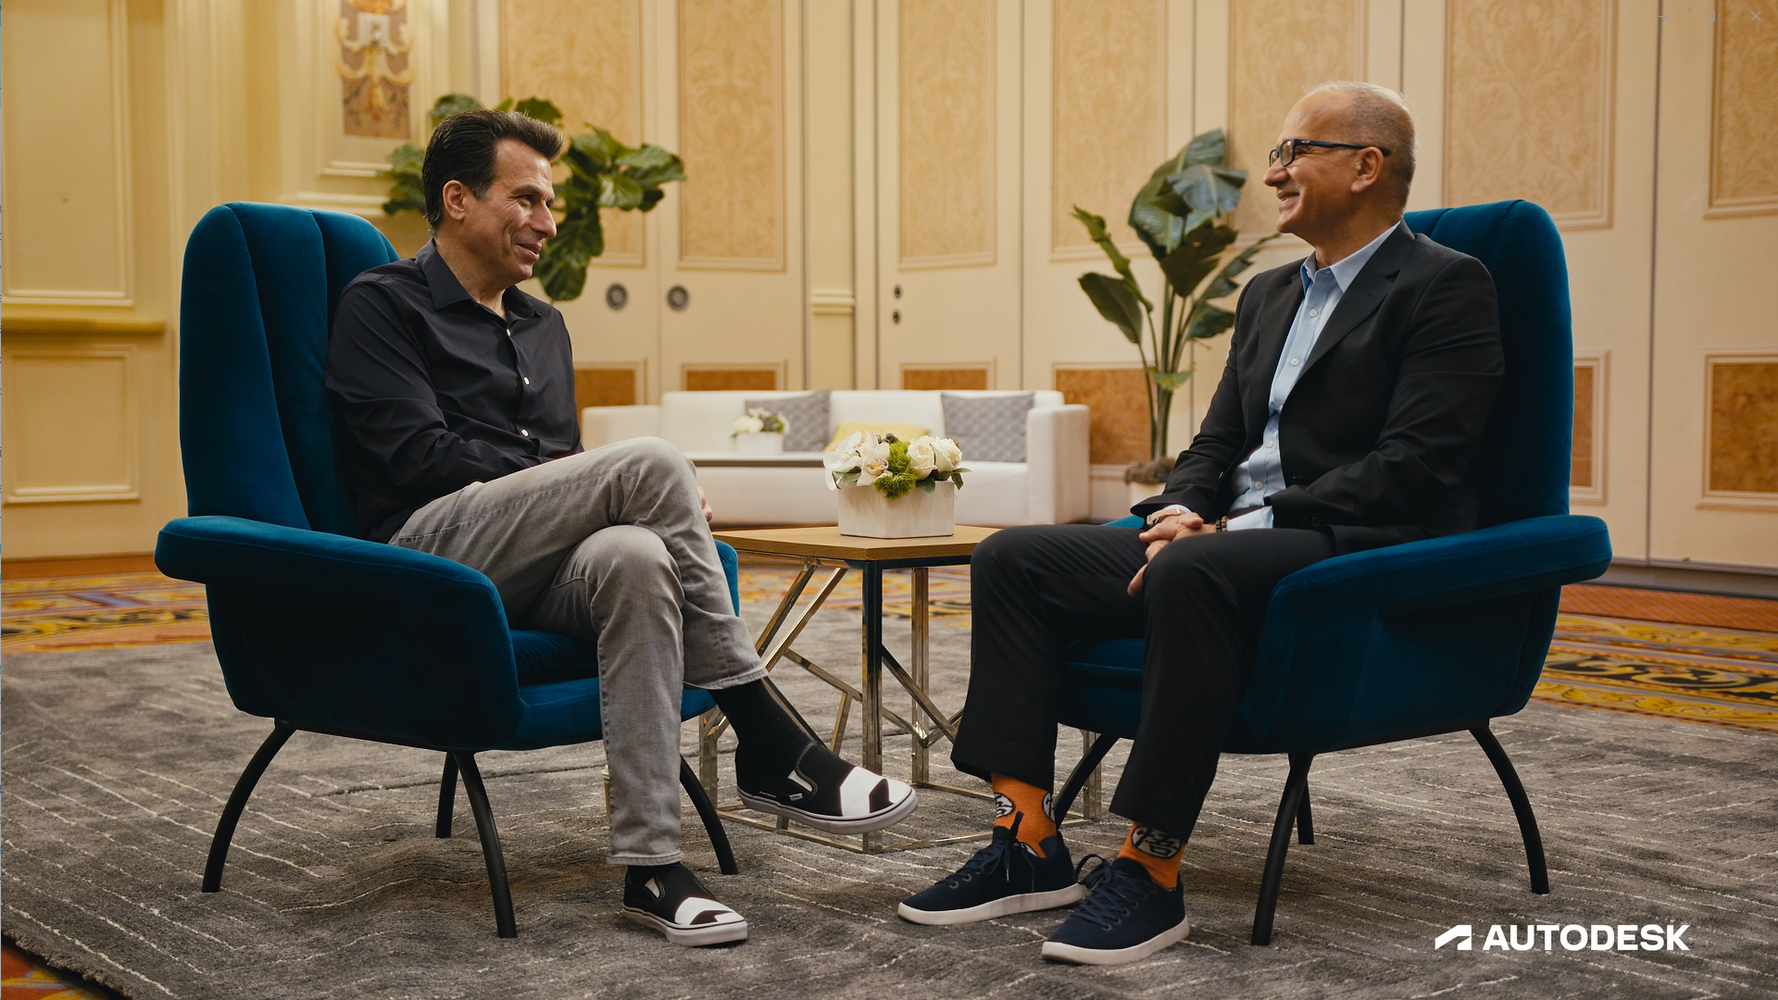 Autodesk CEO Andrew Anagnost & CECS Dean Houssam Toutanji sitting together for an interview.